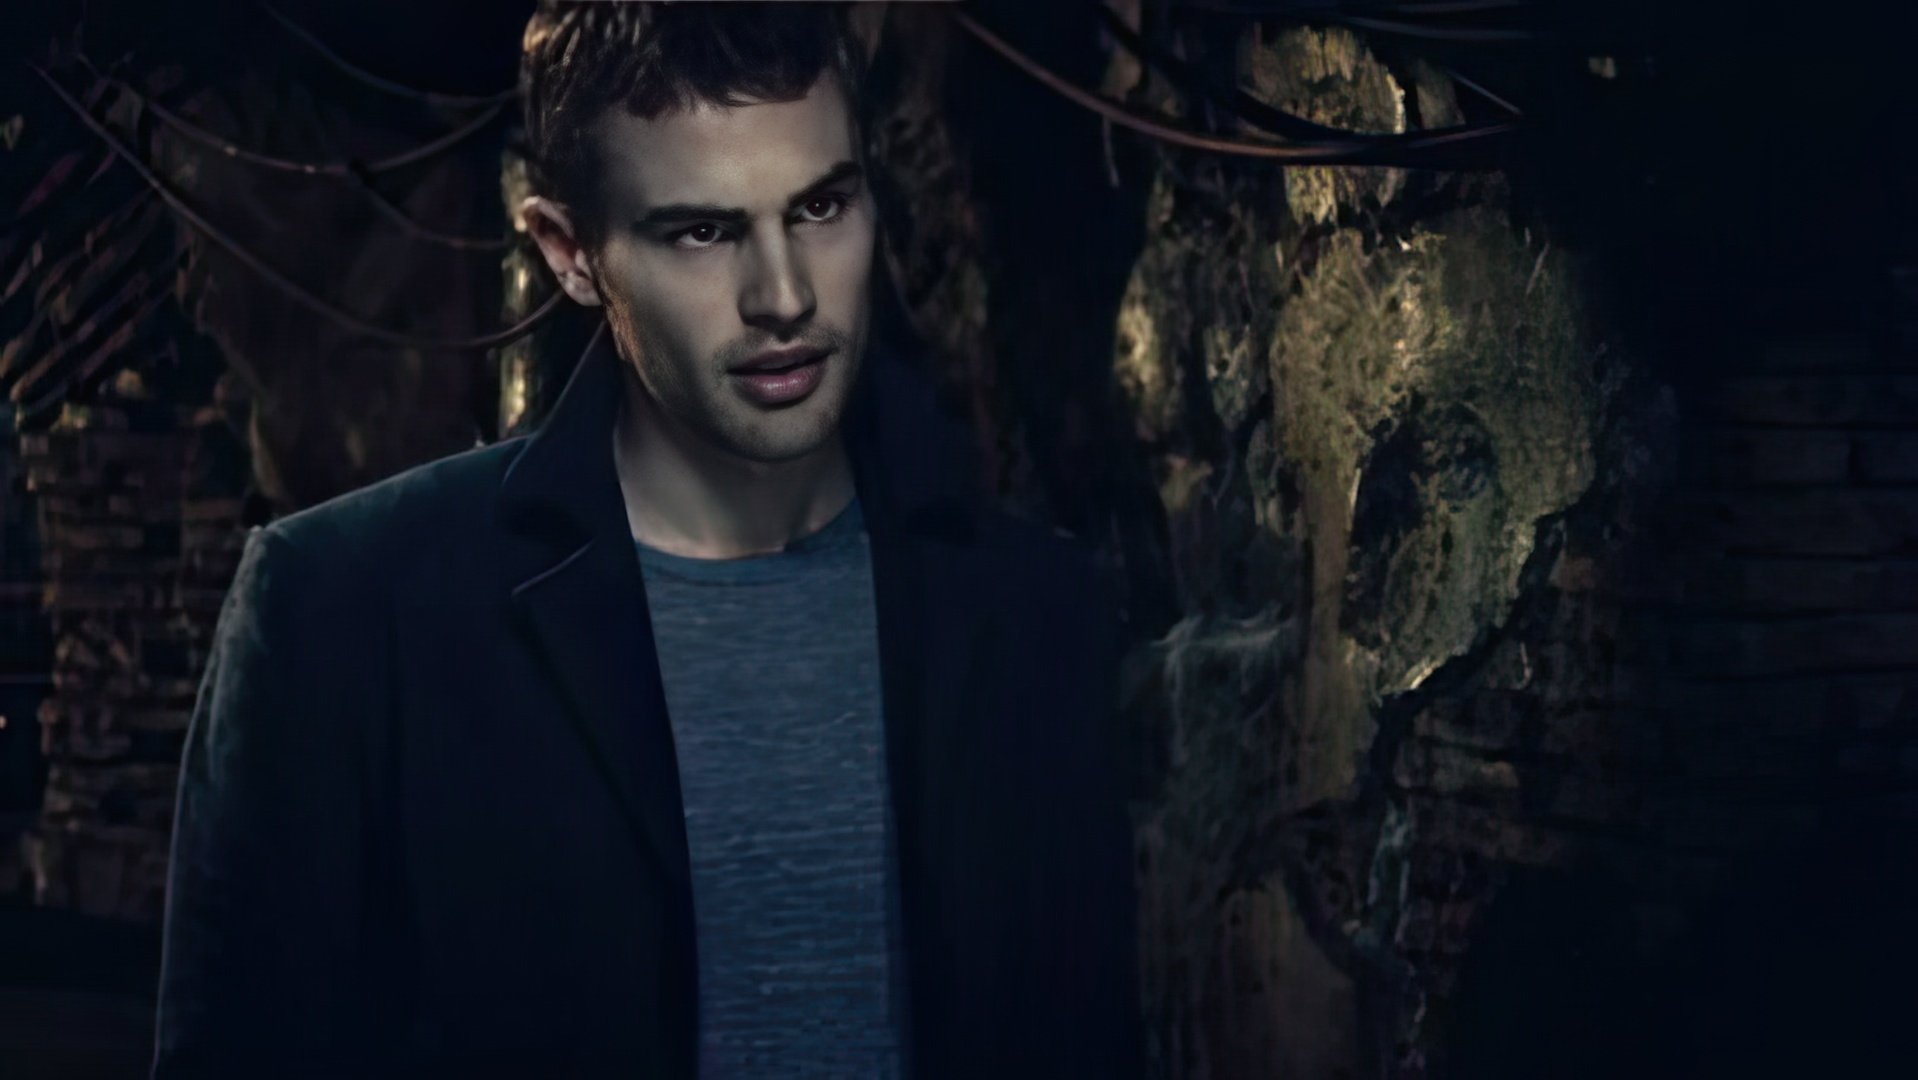 The 'Underworld' franchise: Theo James as a vampire